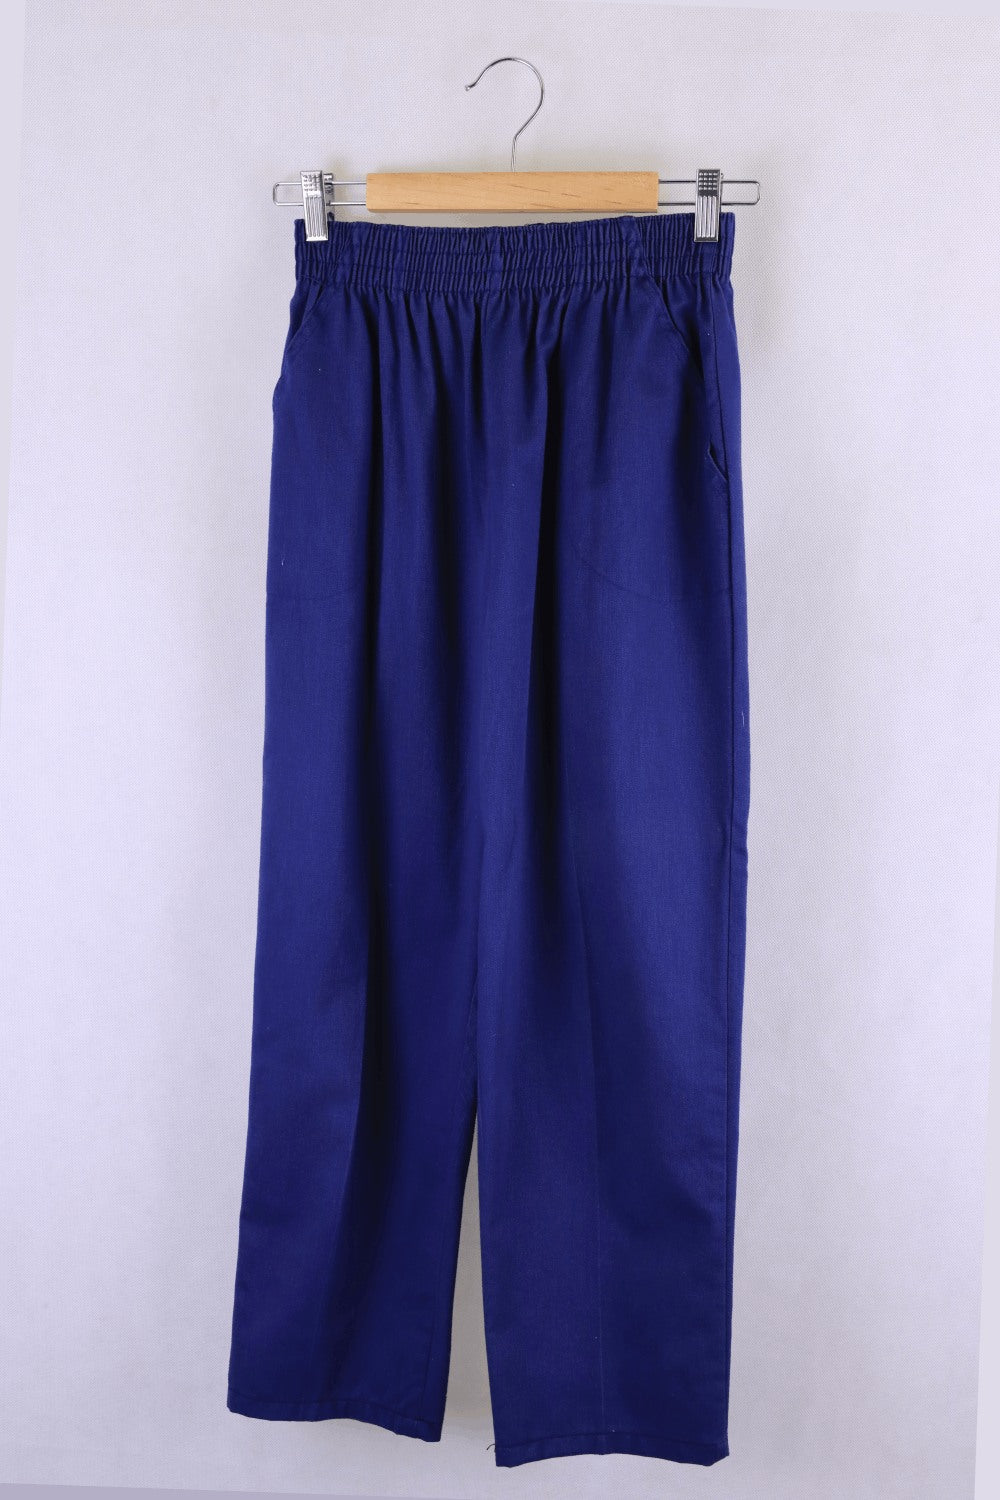 Separate Issue Blue Pants S